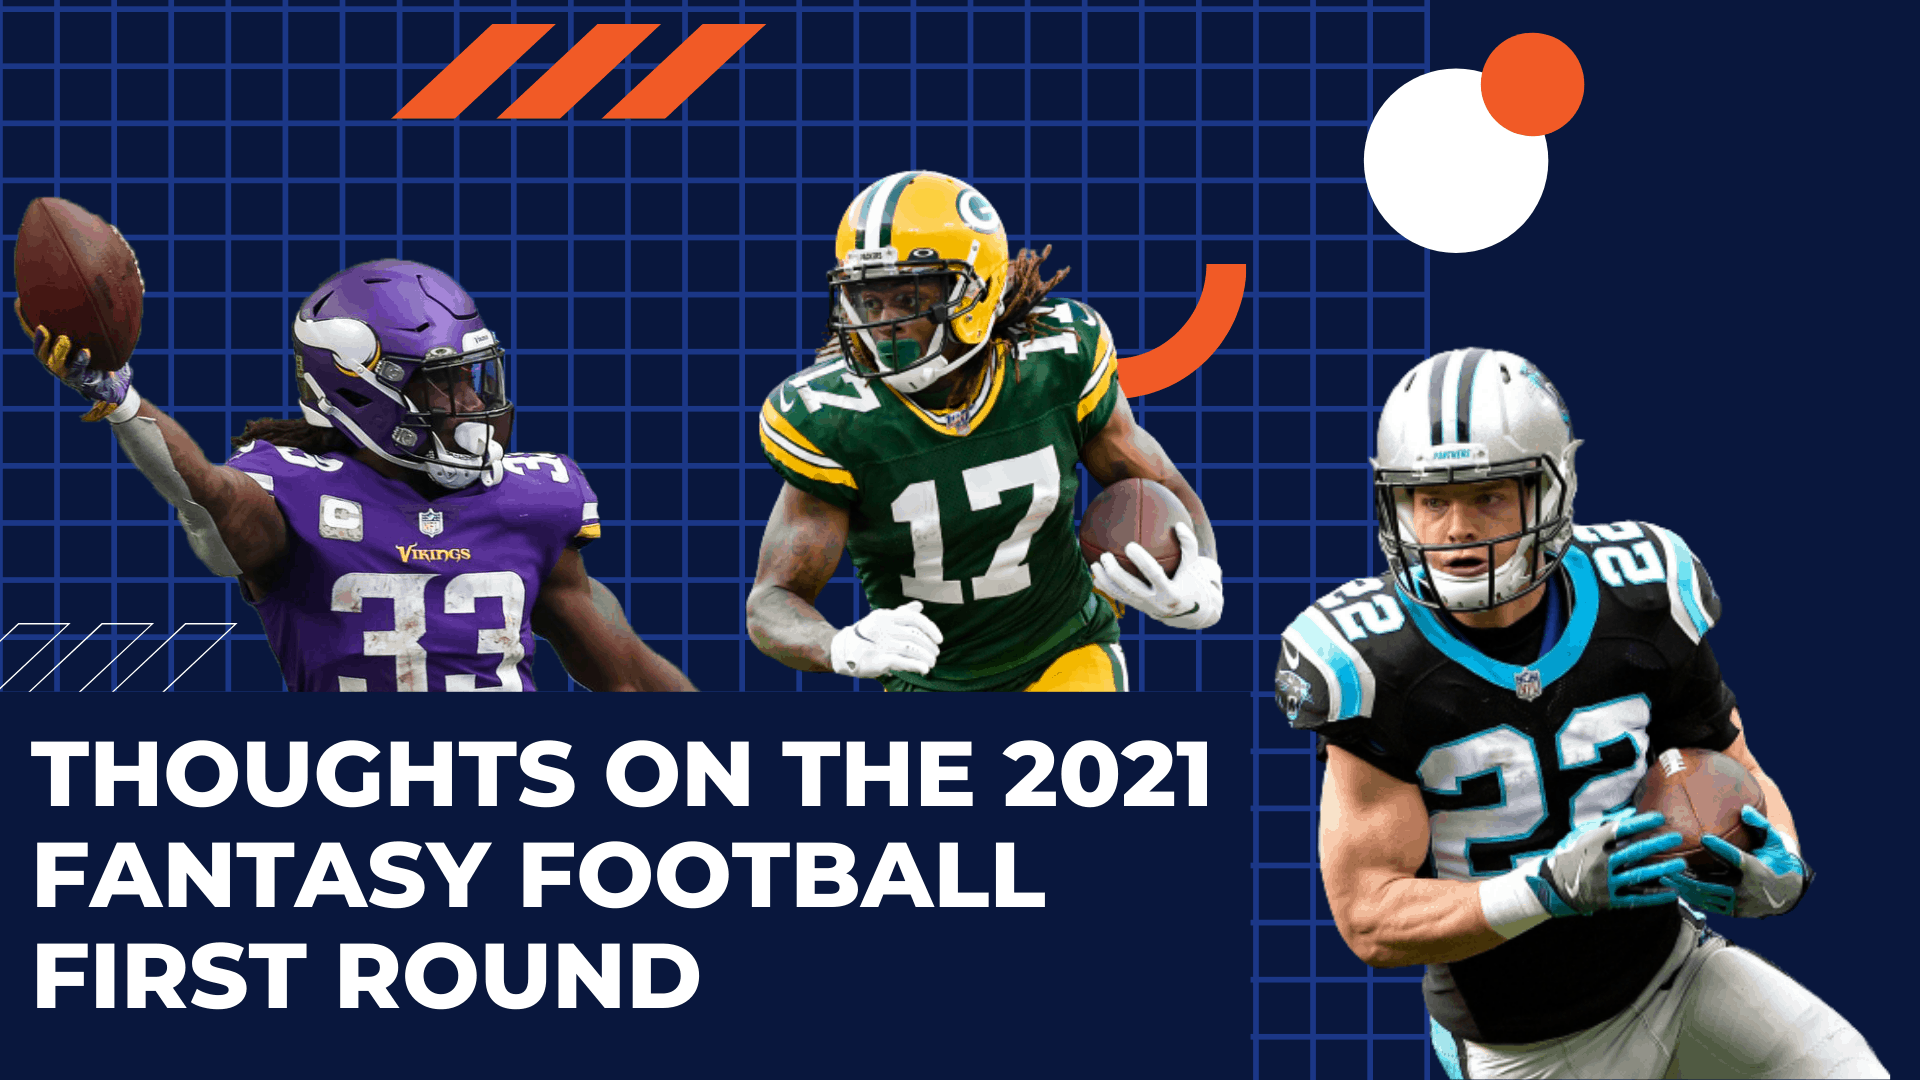 Fantasy Football Thoughts on The 2021 First Round First Seed Sports